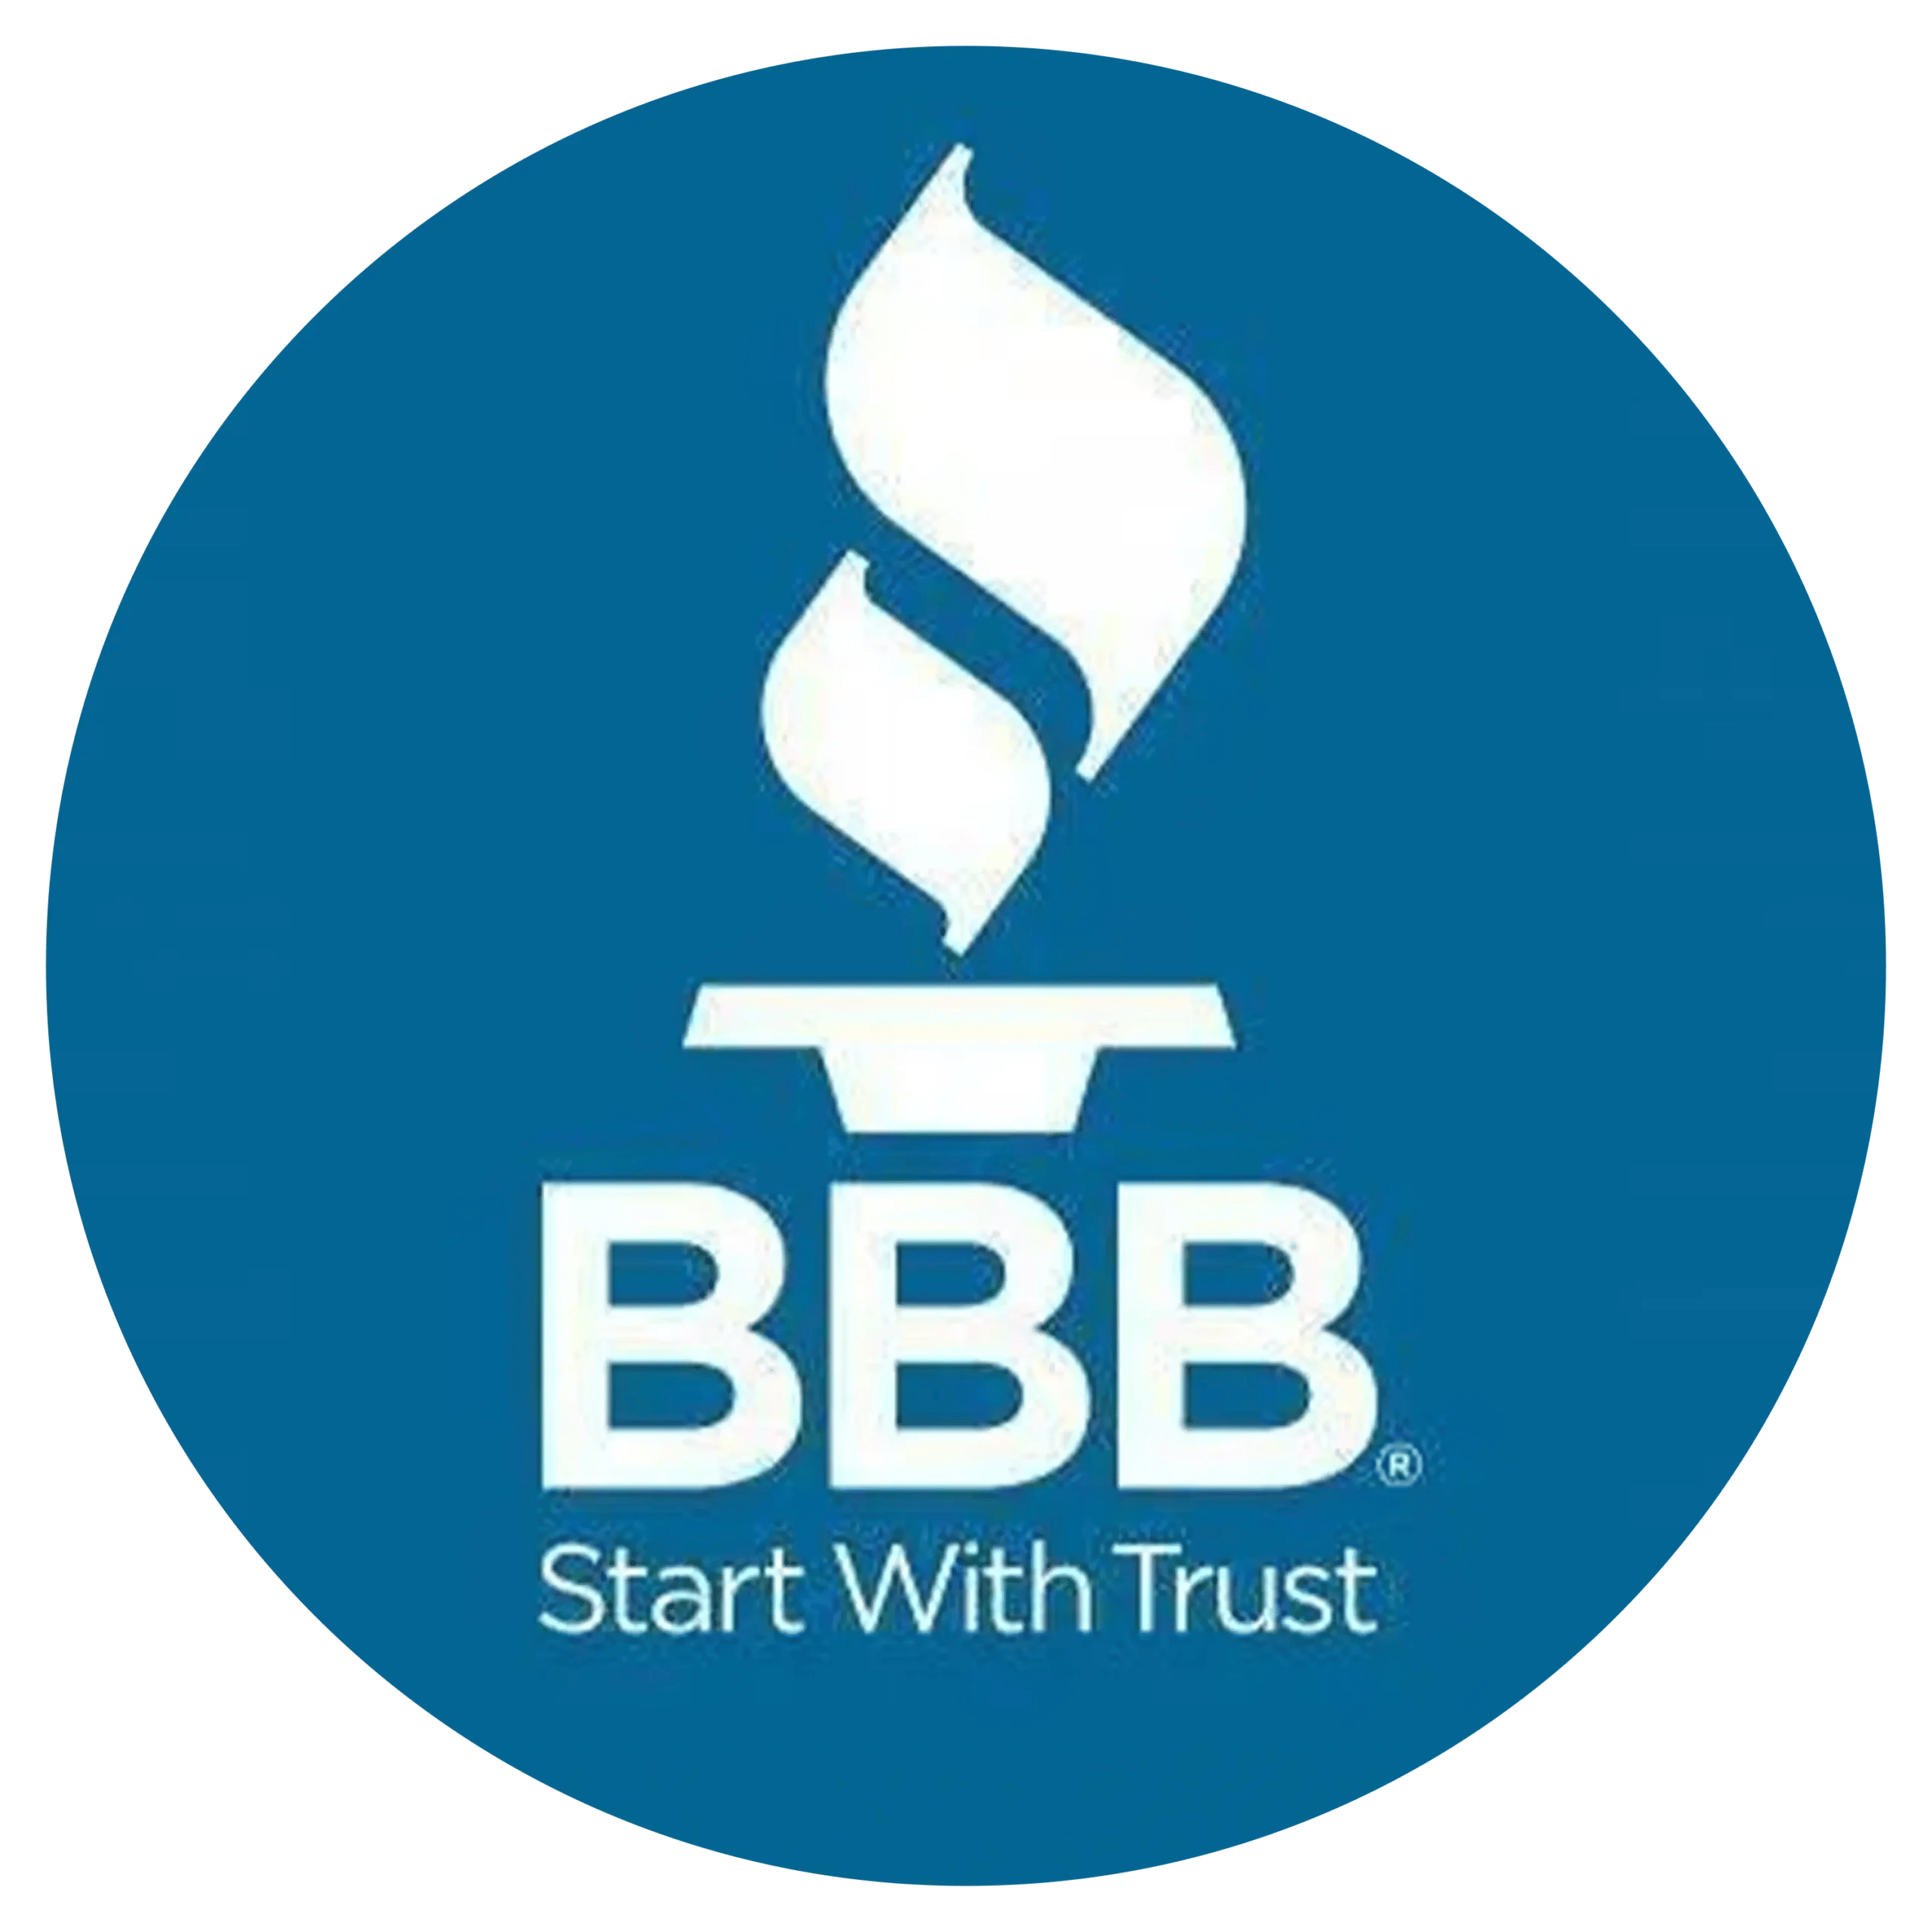 BBB Start With Trust